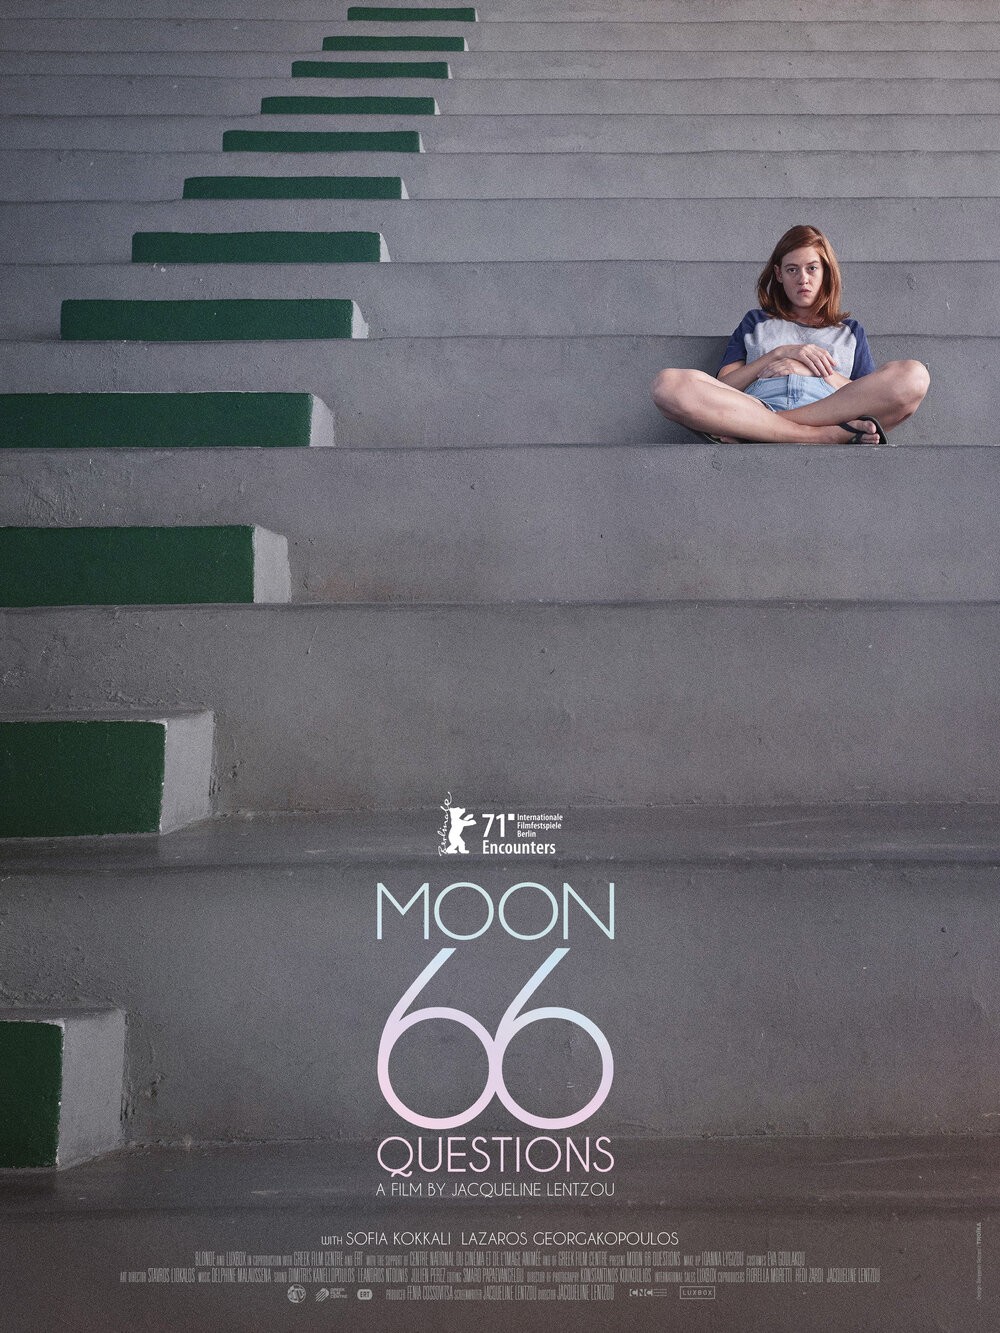 Moon, 66 Questions (2021) - Rotten Tomatoes